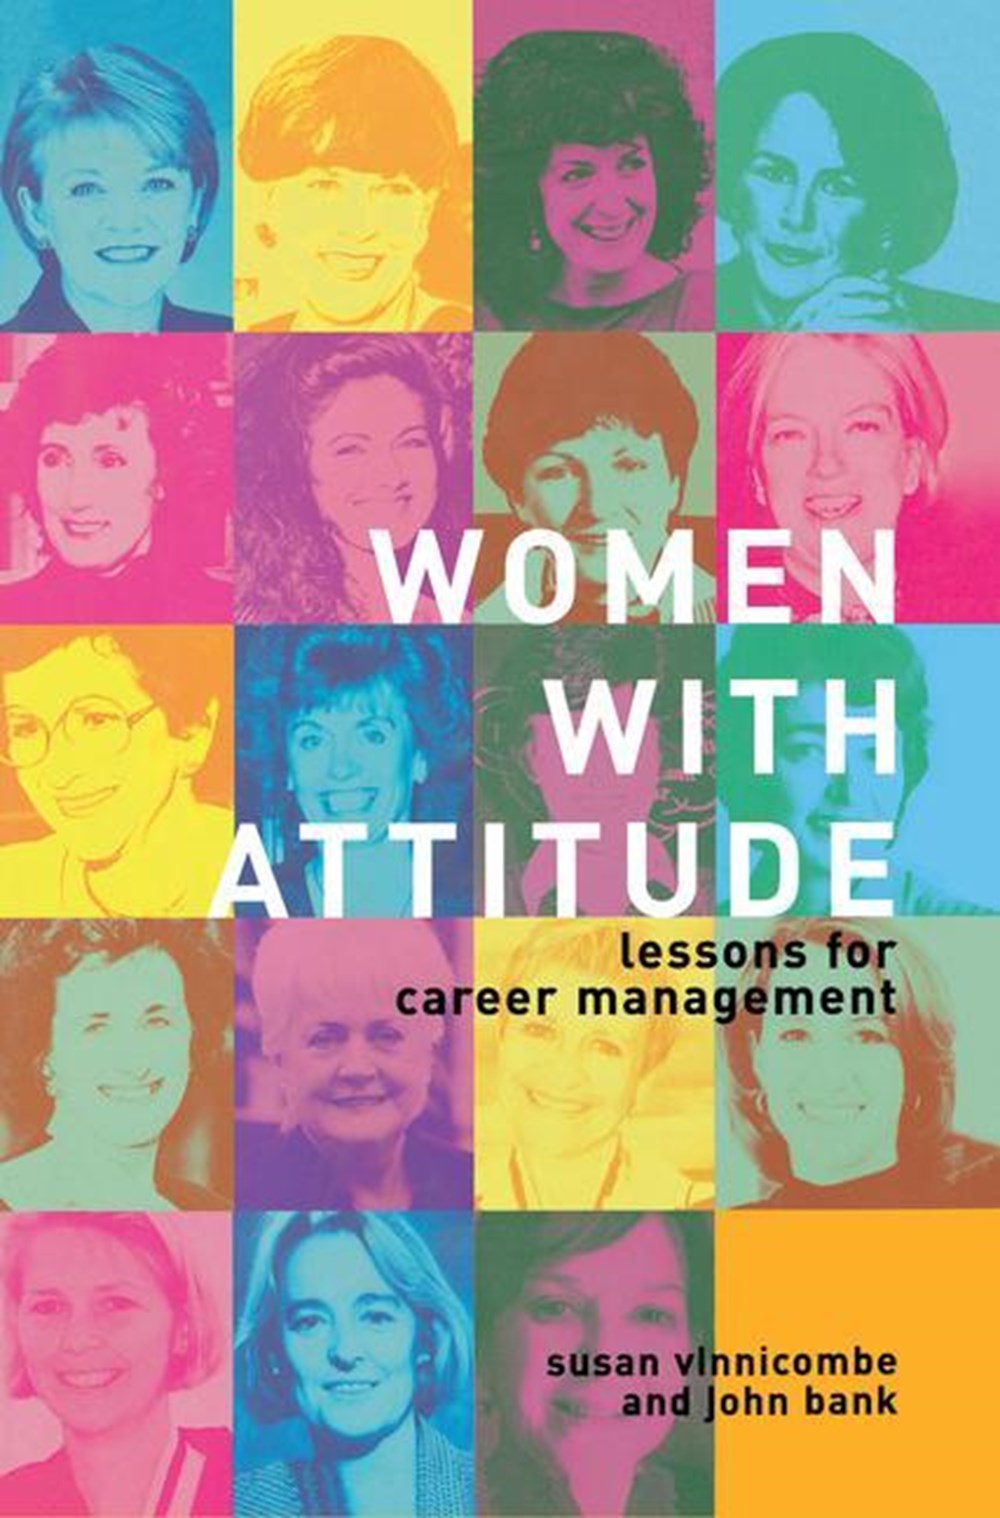 Women With Attitude: Lessons for Career Management